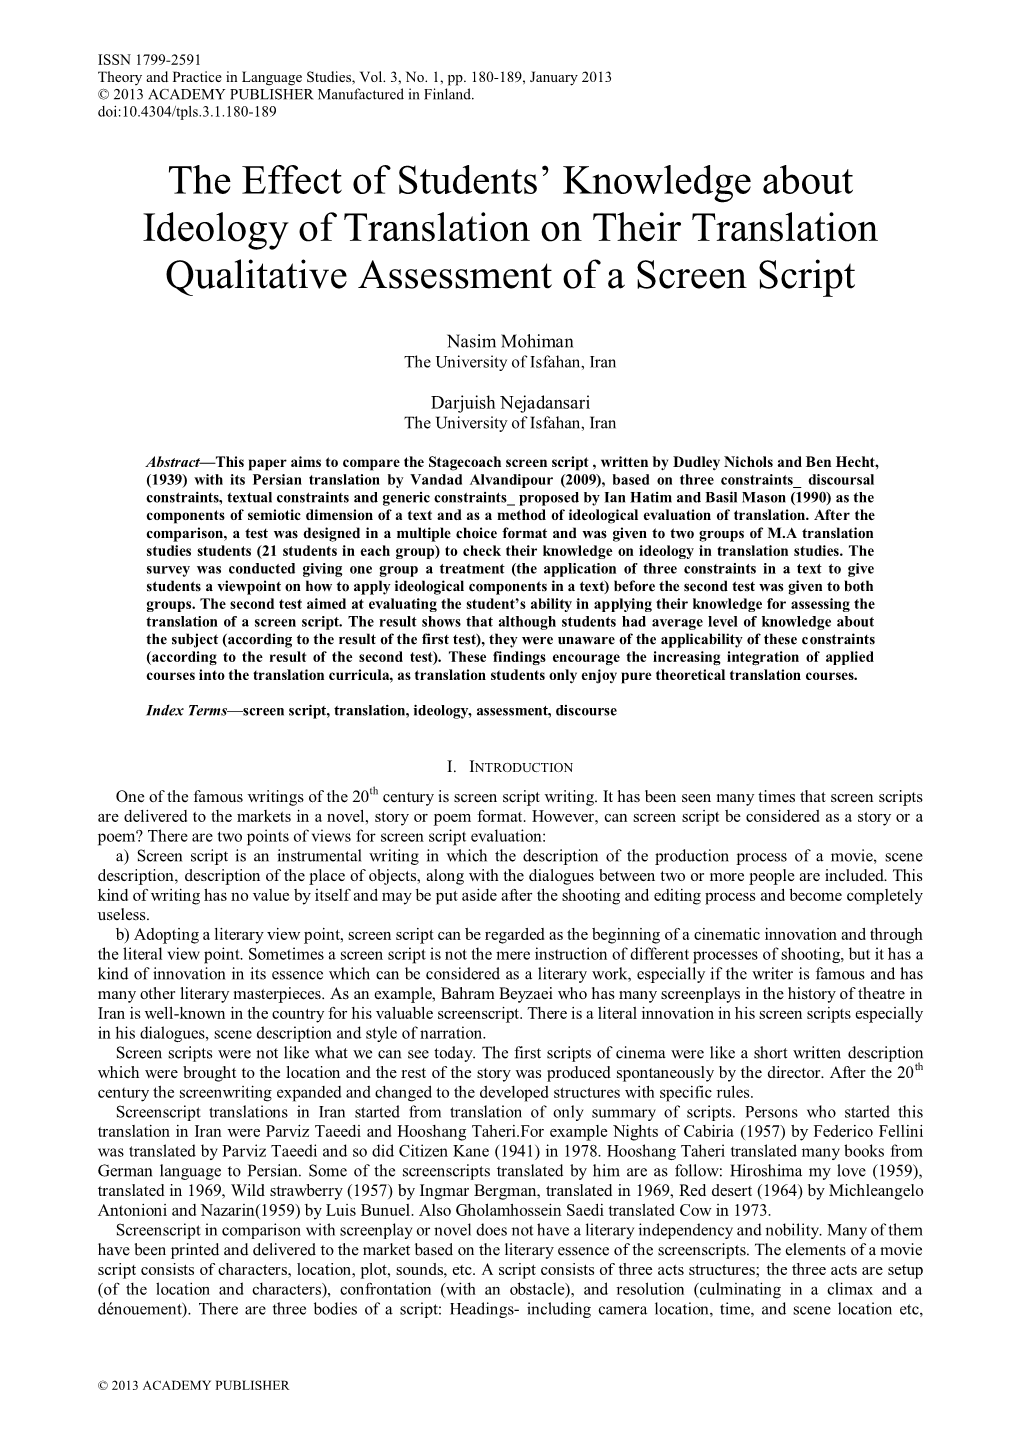 The Effect of Students‟ Knowledge About Ideology of Translation on Their Translation Qualitative Assessment of a Screen Script